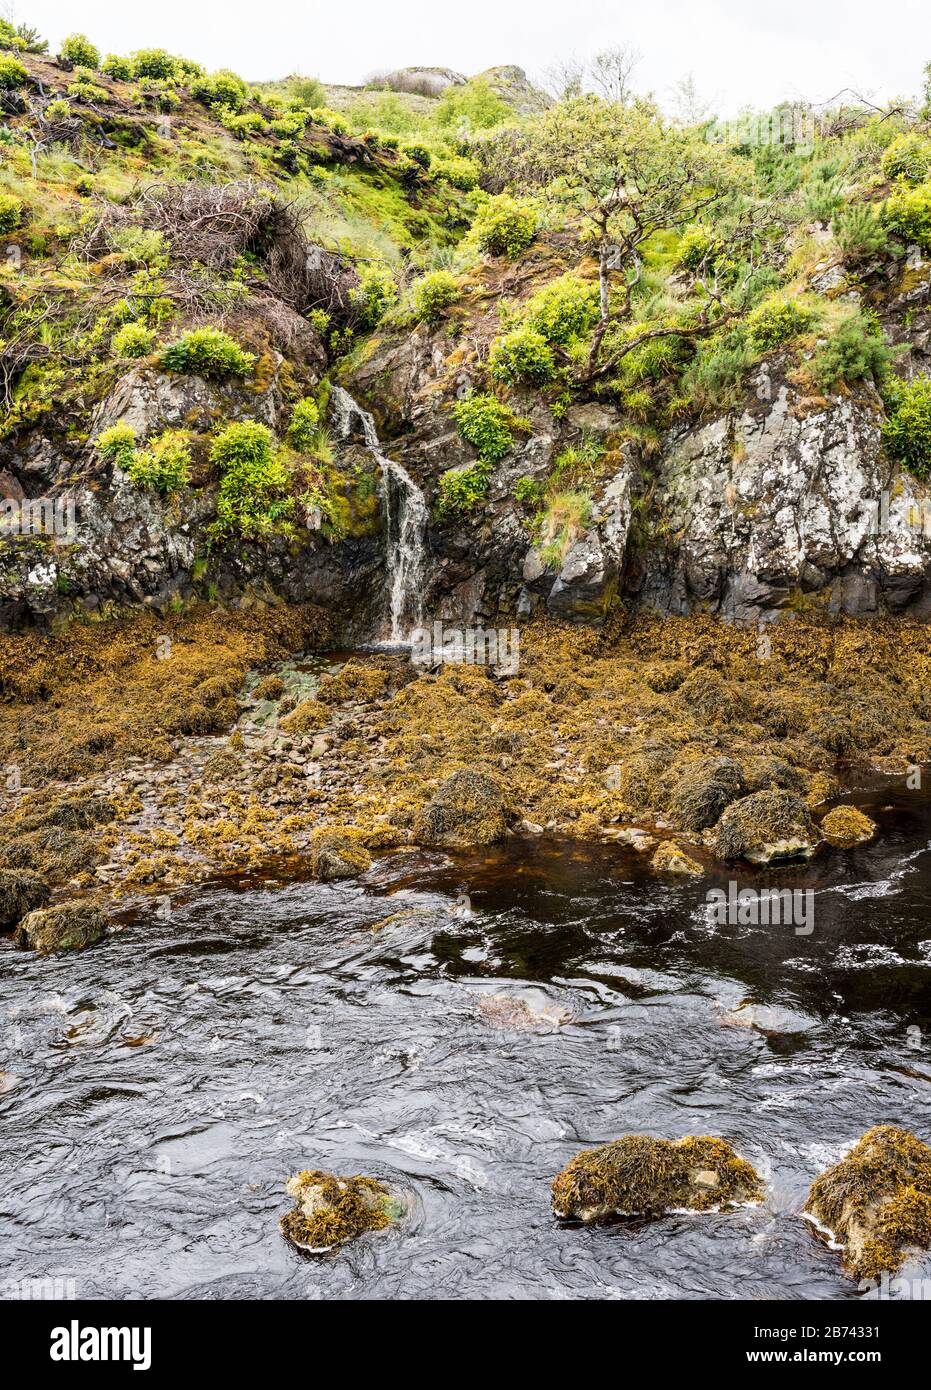 A waterfall drops into the River Creed, near where it flows into Stornoway harbour, seen from the grounds of Lews Castle, Stornoway, Scotland, UK. Stock Photo